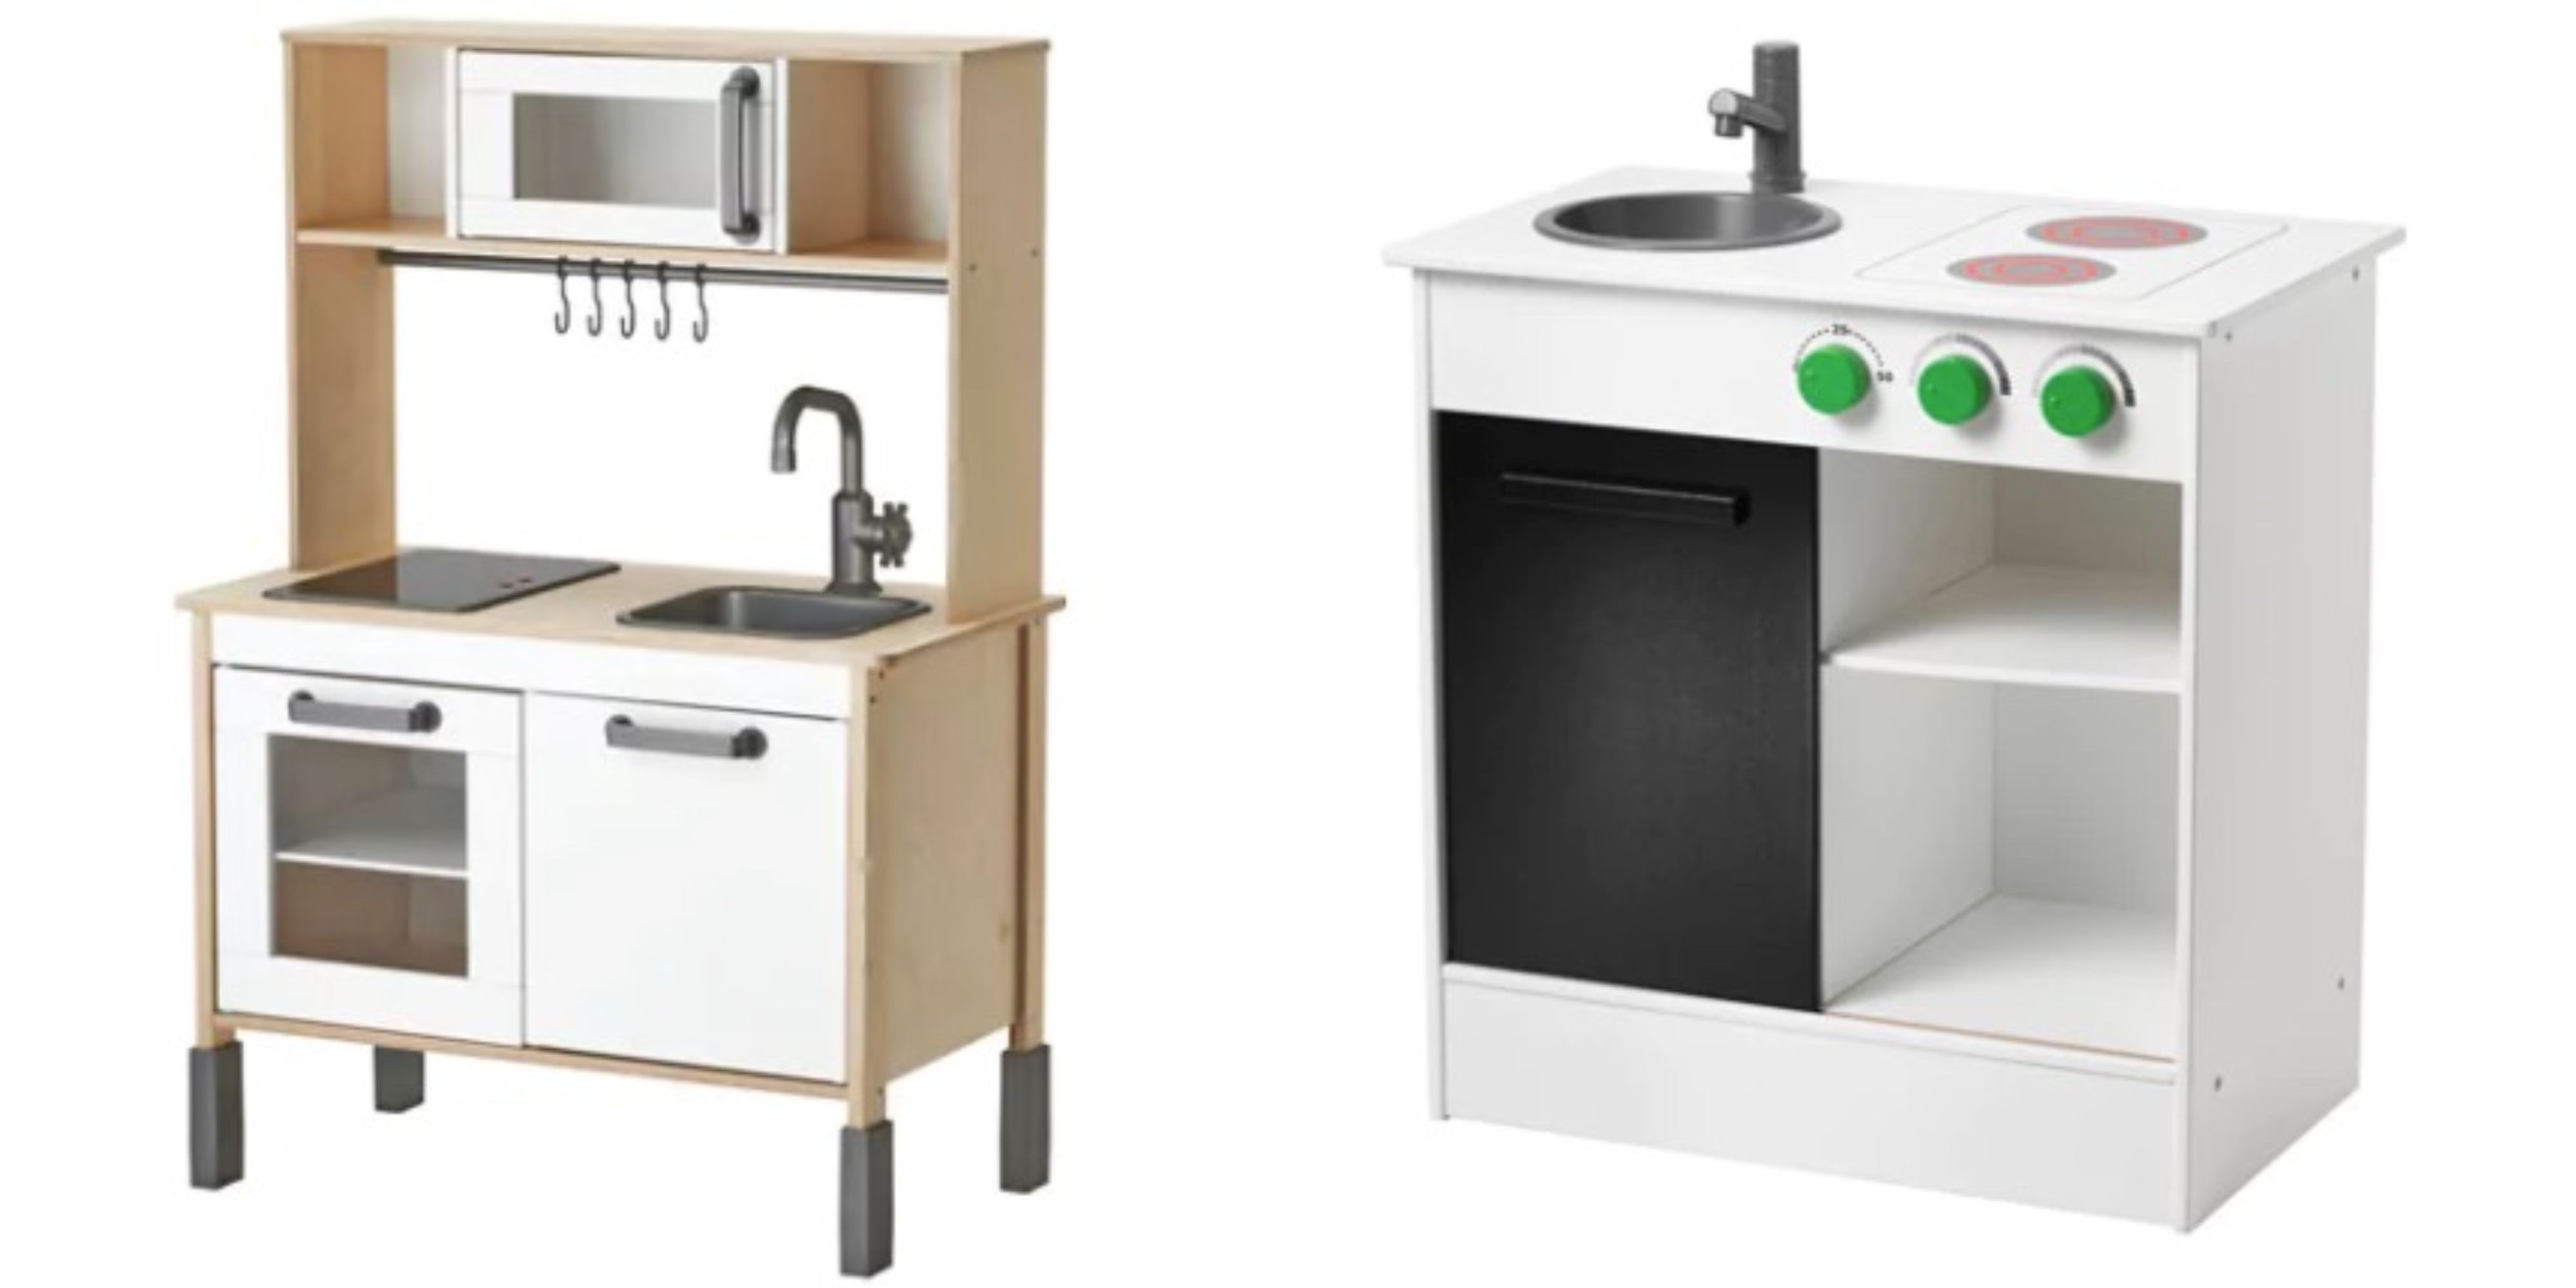 Ikea Wooden Play Kitchens 1535451645 